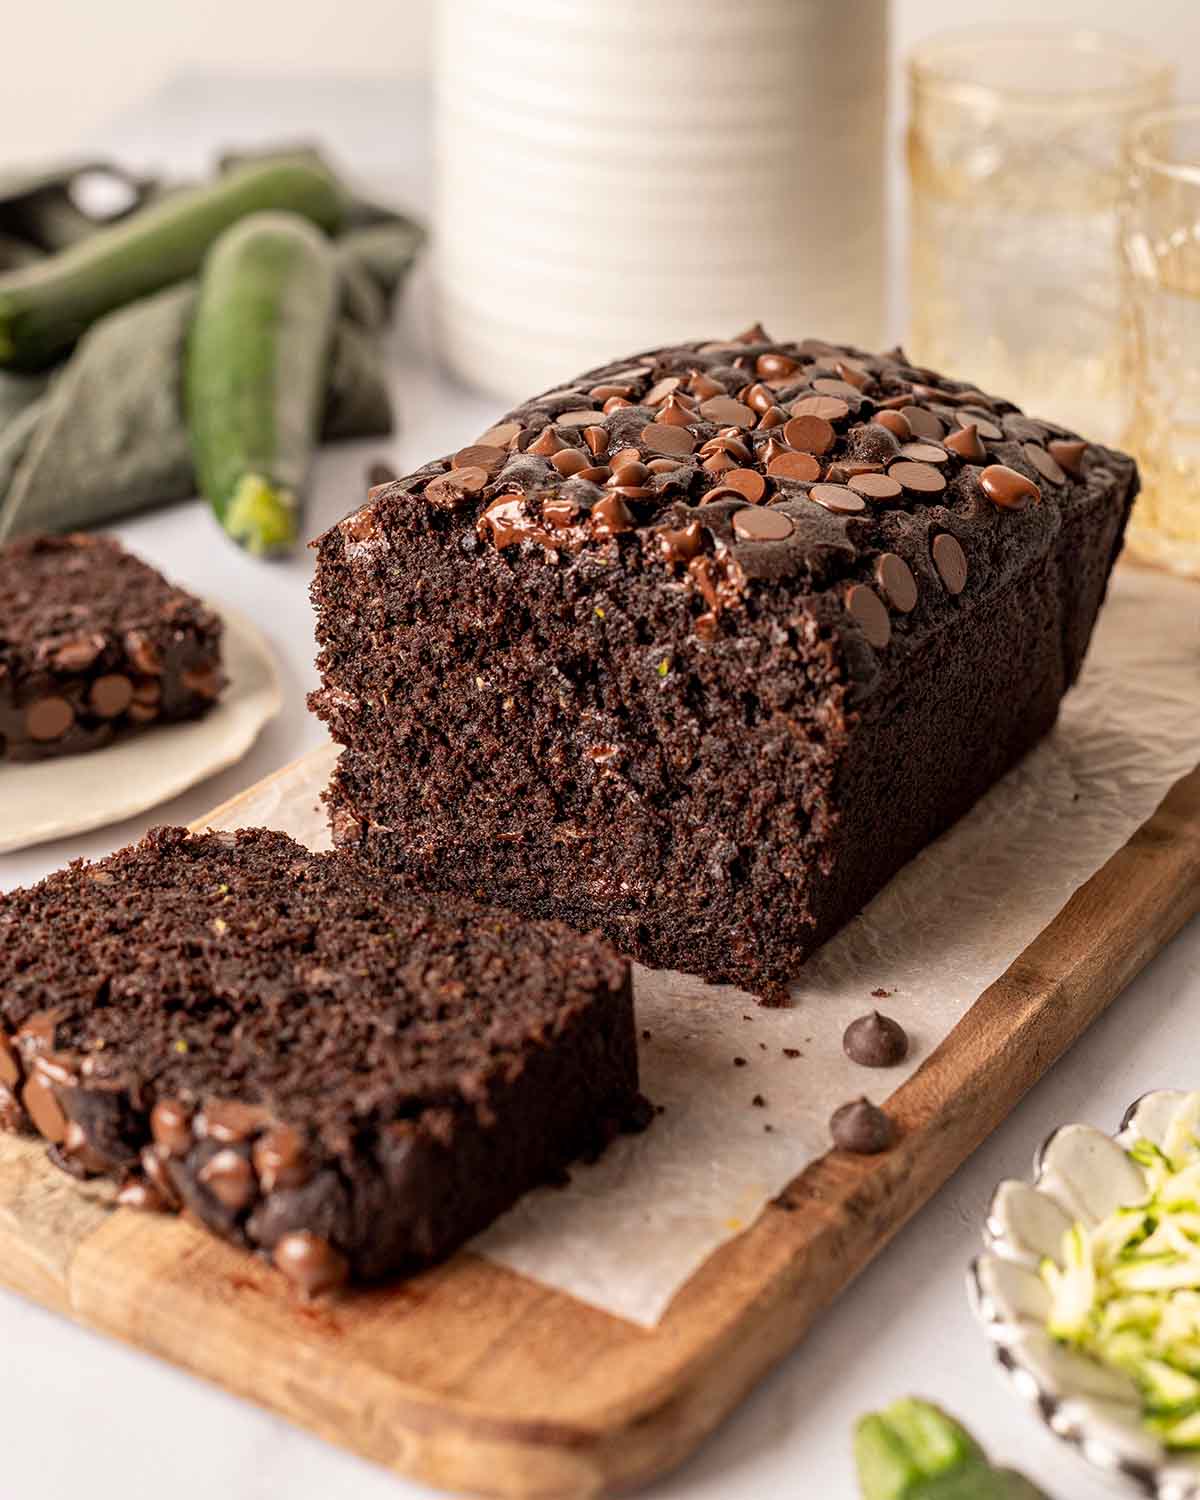 Chocolate zucchini bread on chopping board with one slice of the bread sliced off so you can see the rich and fluffy texture of the bread.